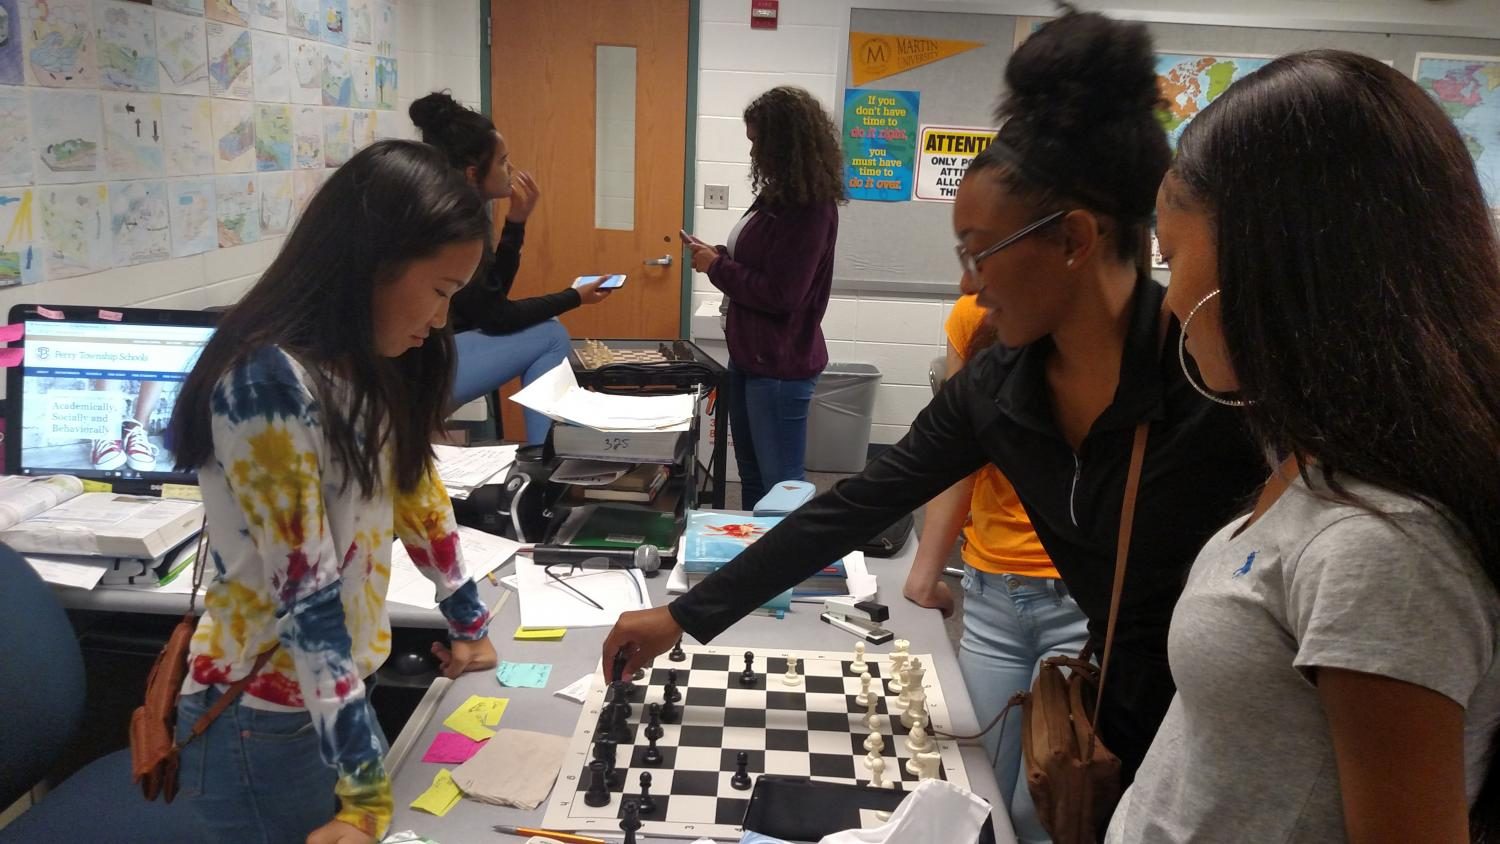 Lauren Houk and Kaleyah Kimbrough face off in an intense game of chess during their BLU63 class